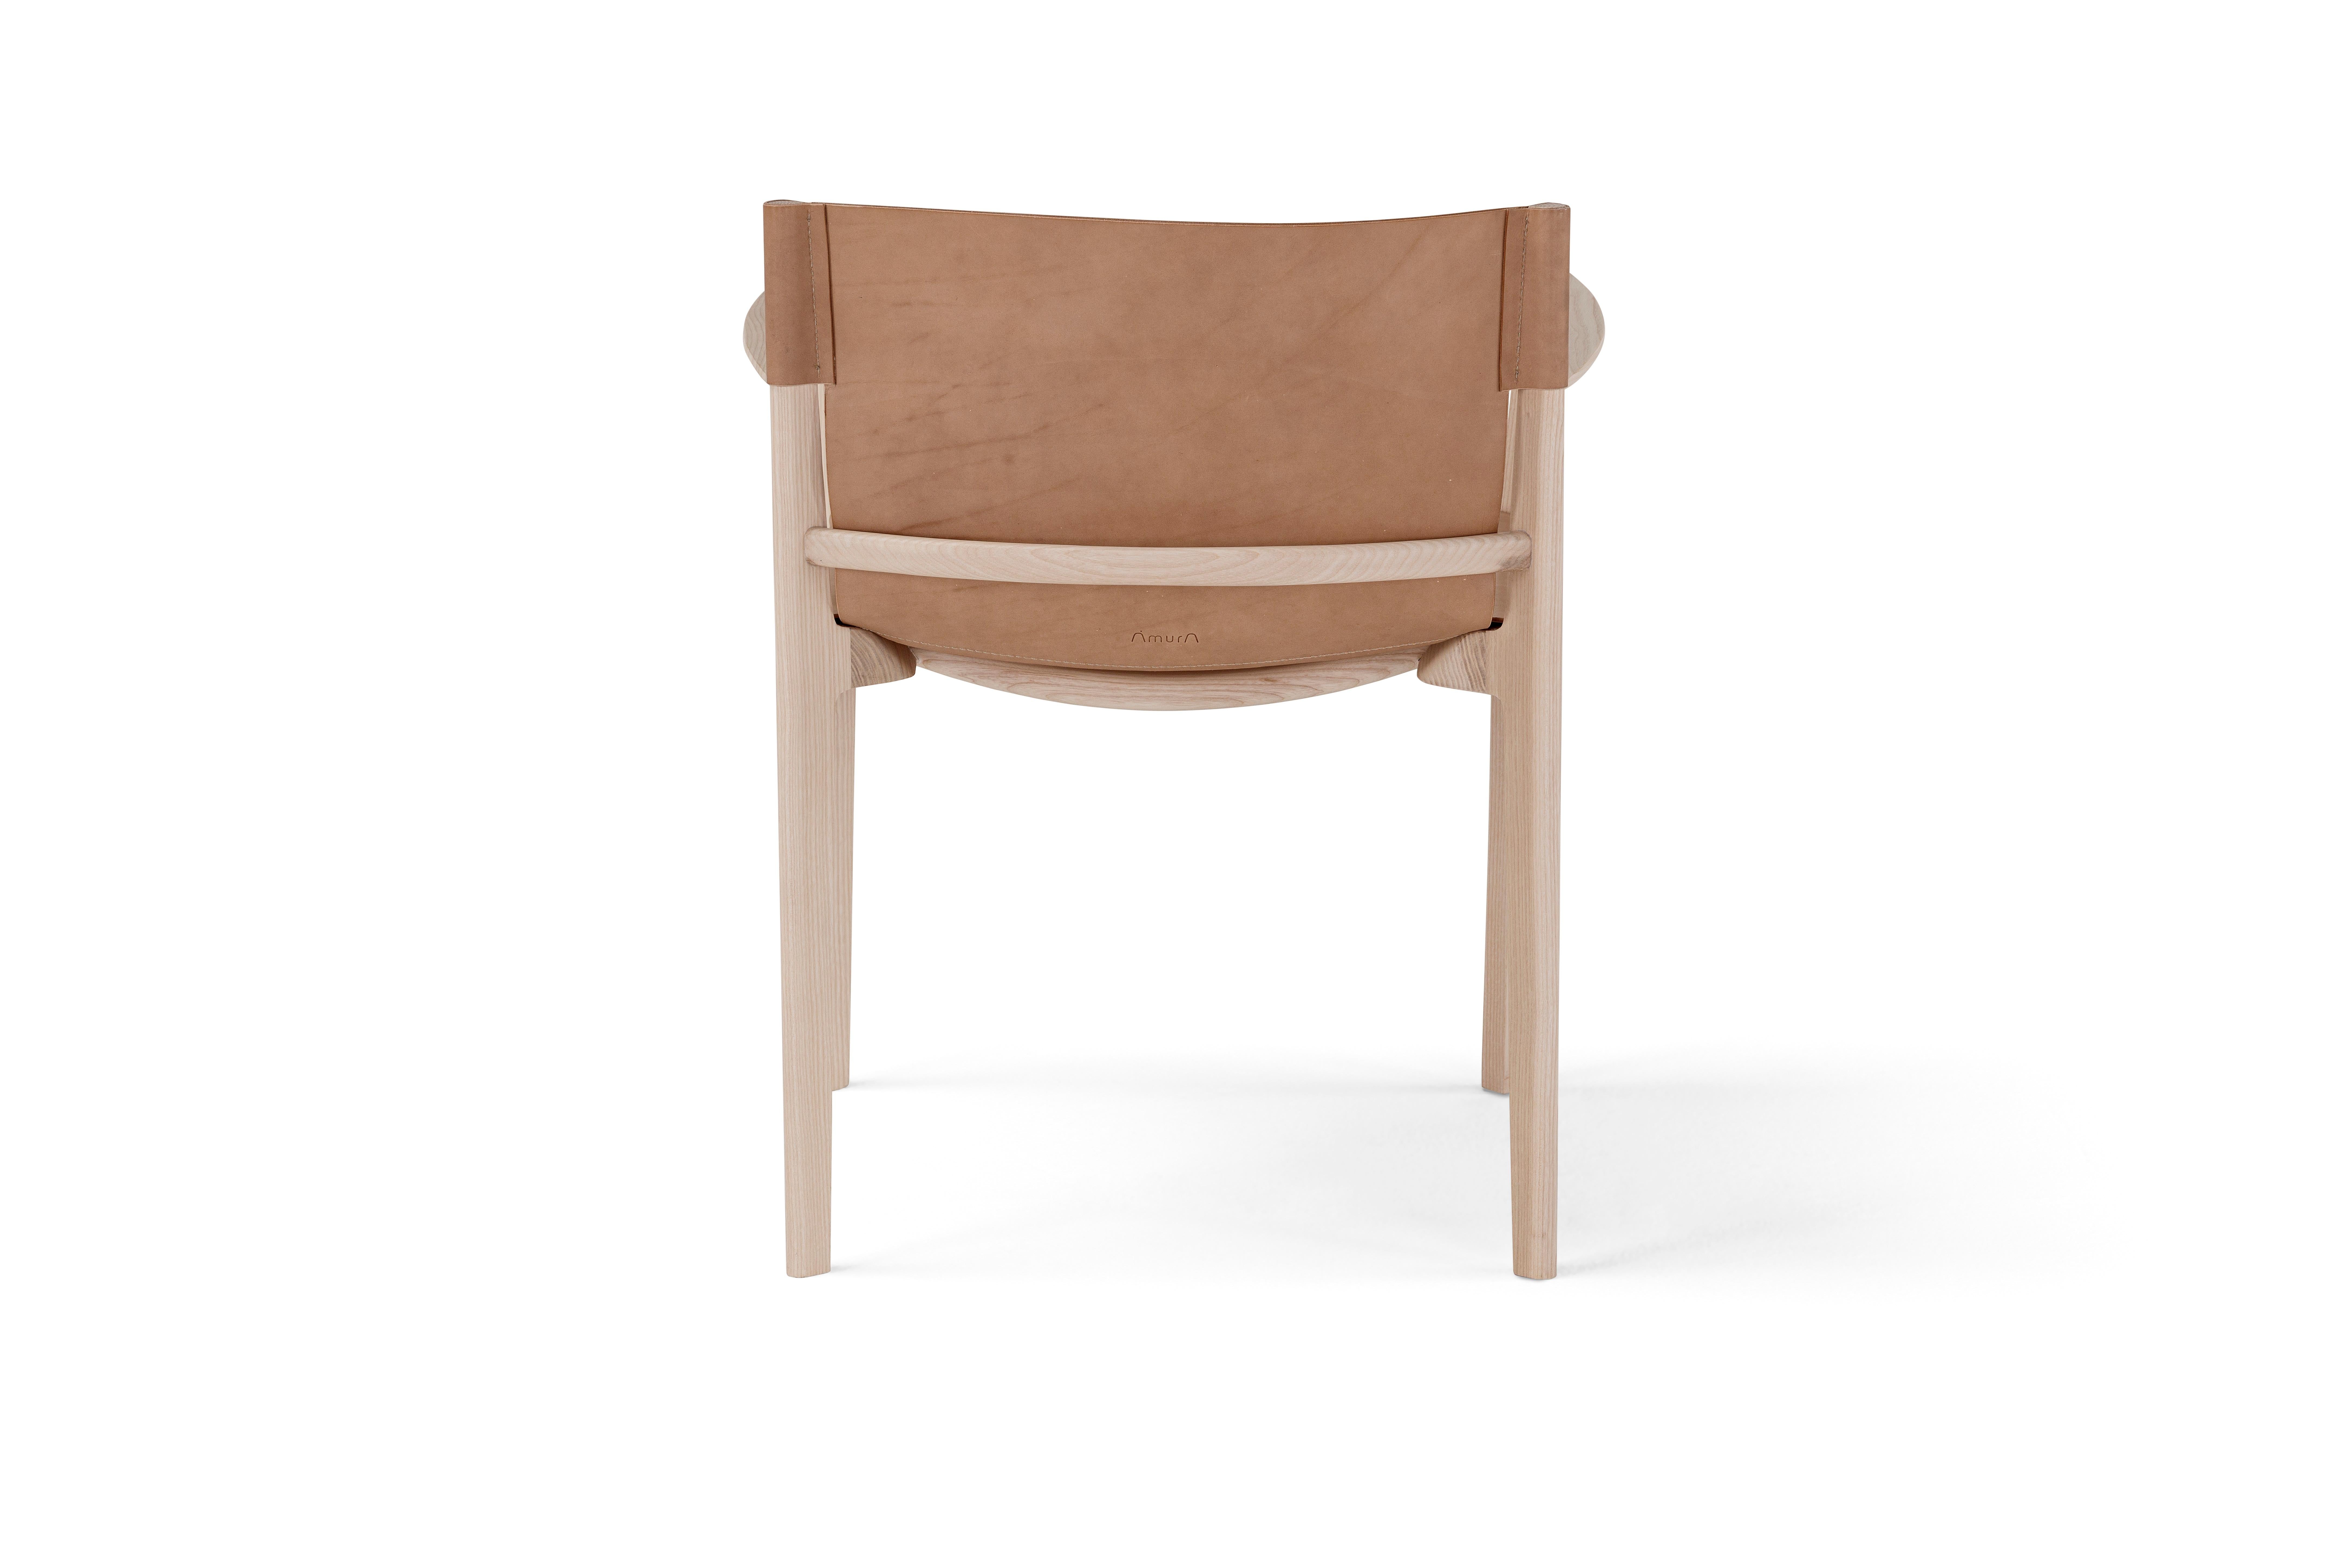 Italian Contemporary Wooden Chair 'Stilt', Cuoio For Sale